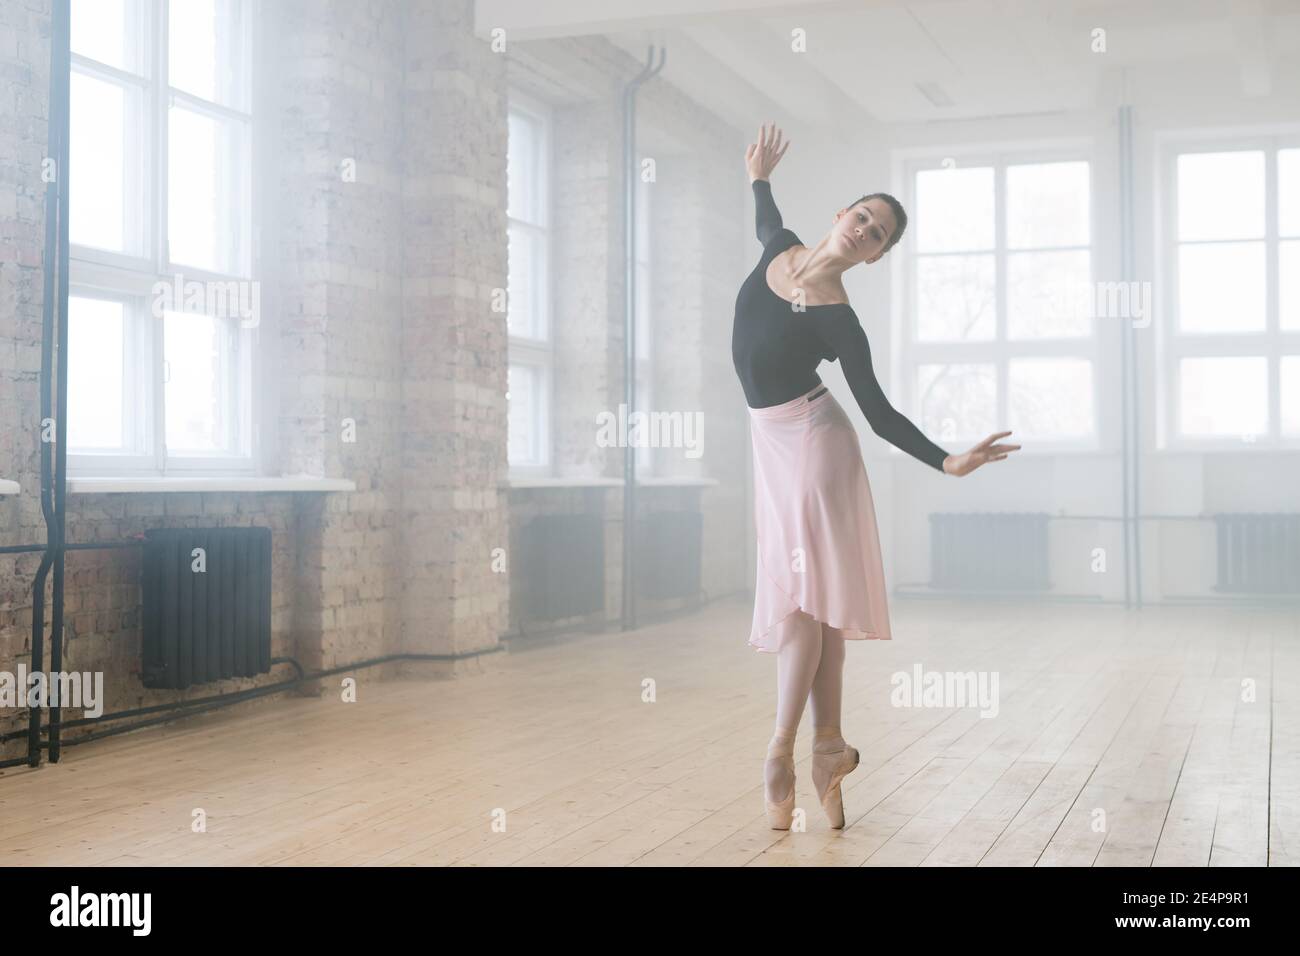 Young beautiful woman ballet dancer dressed in professional outfit pointe shoes and white tutu dancing in studio Stock Photo